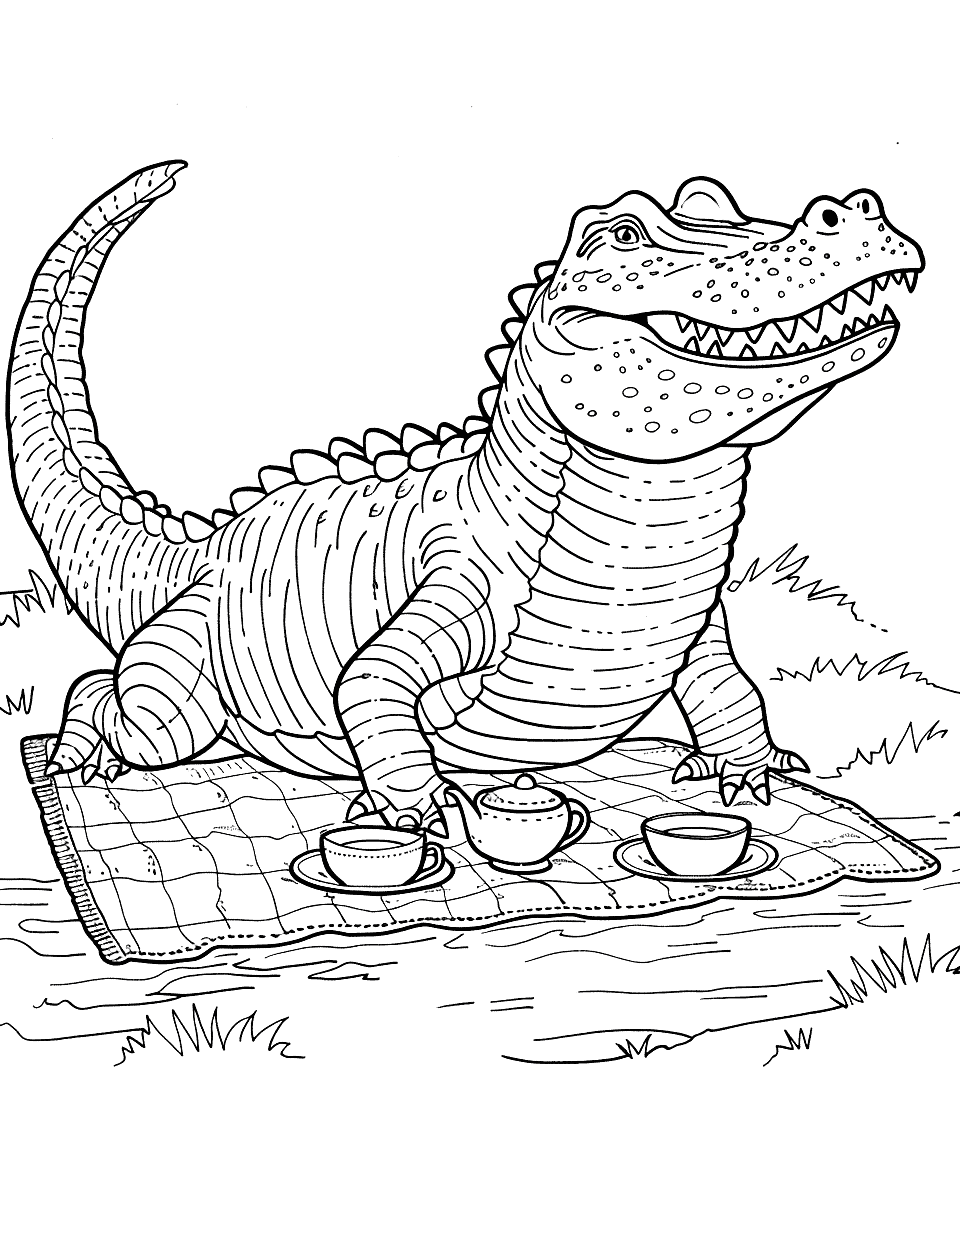 Crocodile Tea Party Coloring Page - A crocodile hosting a tea party with a teapot and cups set out on a picnic blanket.